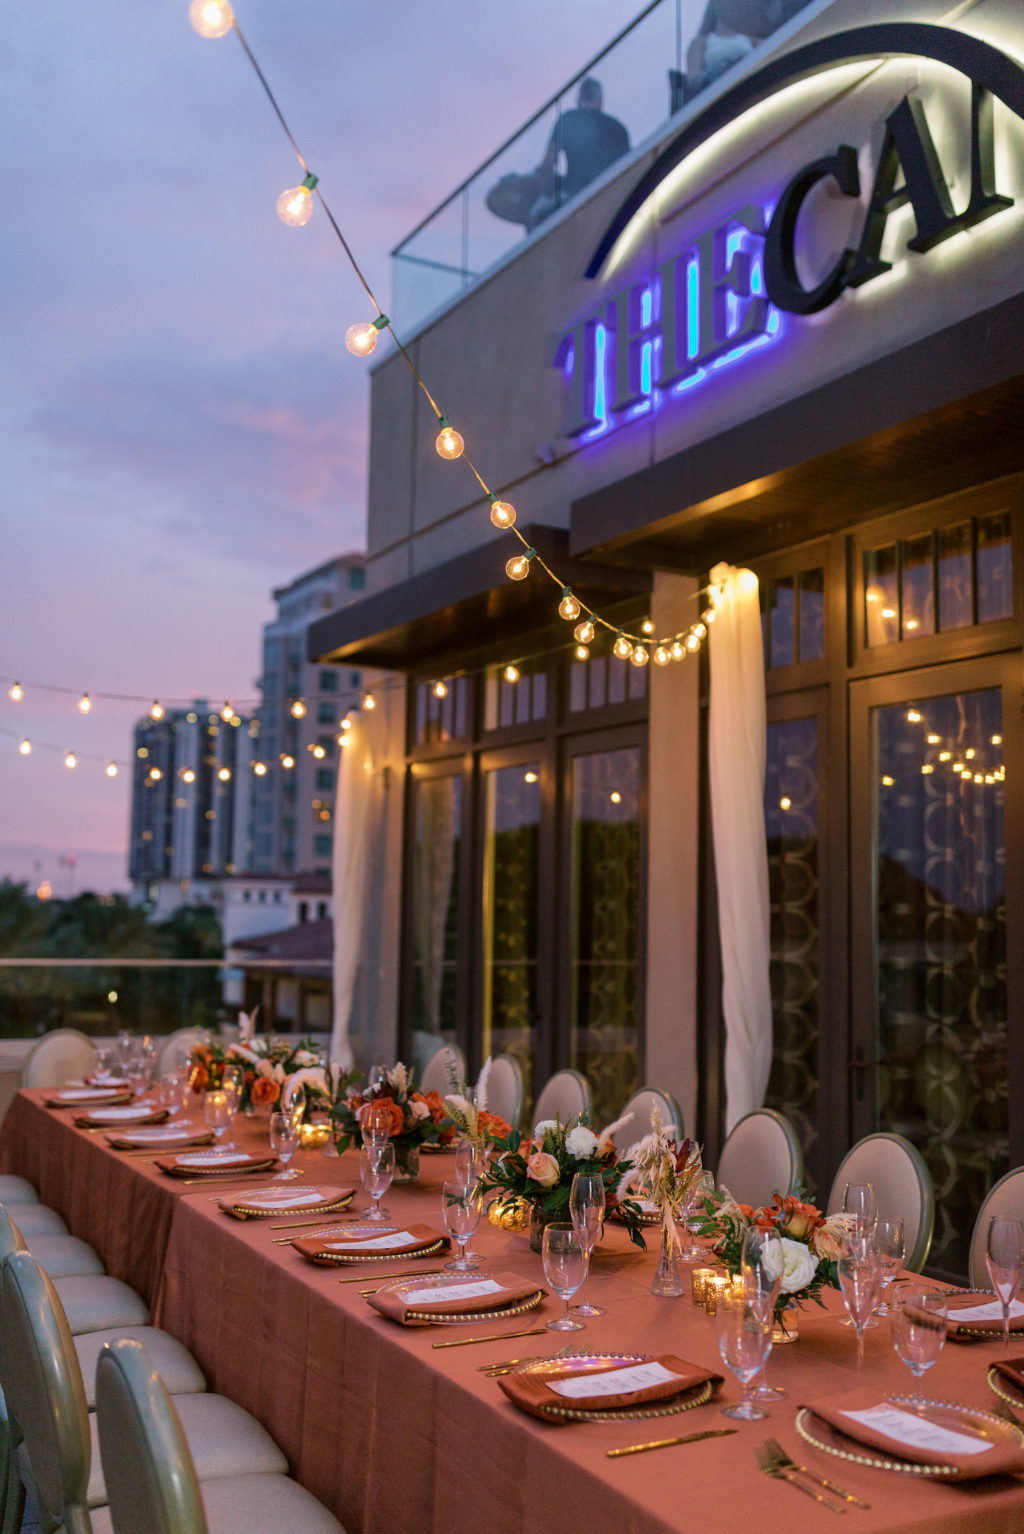 Outdoor Terrace Wedding Feasting Table at St. Pete Wedding Venue The Birchwood | Intimate Micro Wedding Elopement COVID Styled Shoot | Fall Autumn Wedding Inspiration | Hotel Terrace Reception with Canopy String Lights Orange Copper Wedding Table Linens | Gold Beaded Glass Chargers with Napkin and Menu Card and Gold Flatware | Wedding Centerpiece with Orange White and Peach Roses